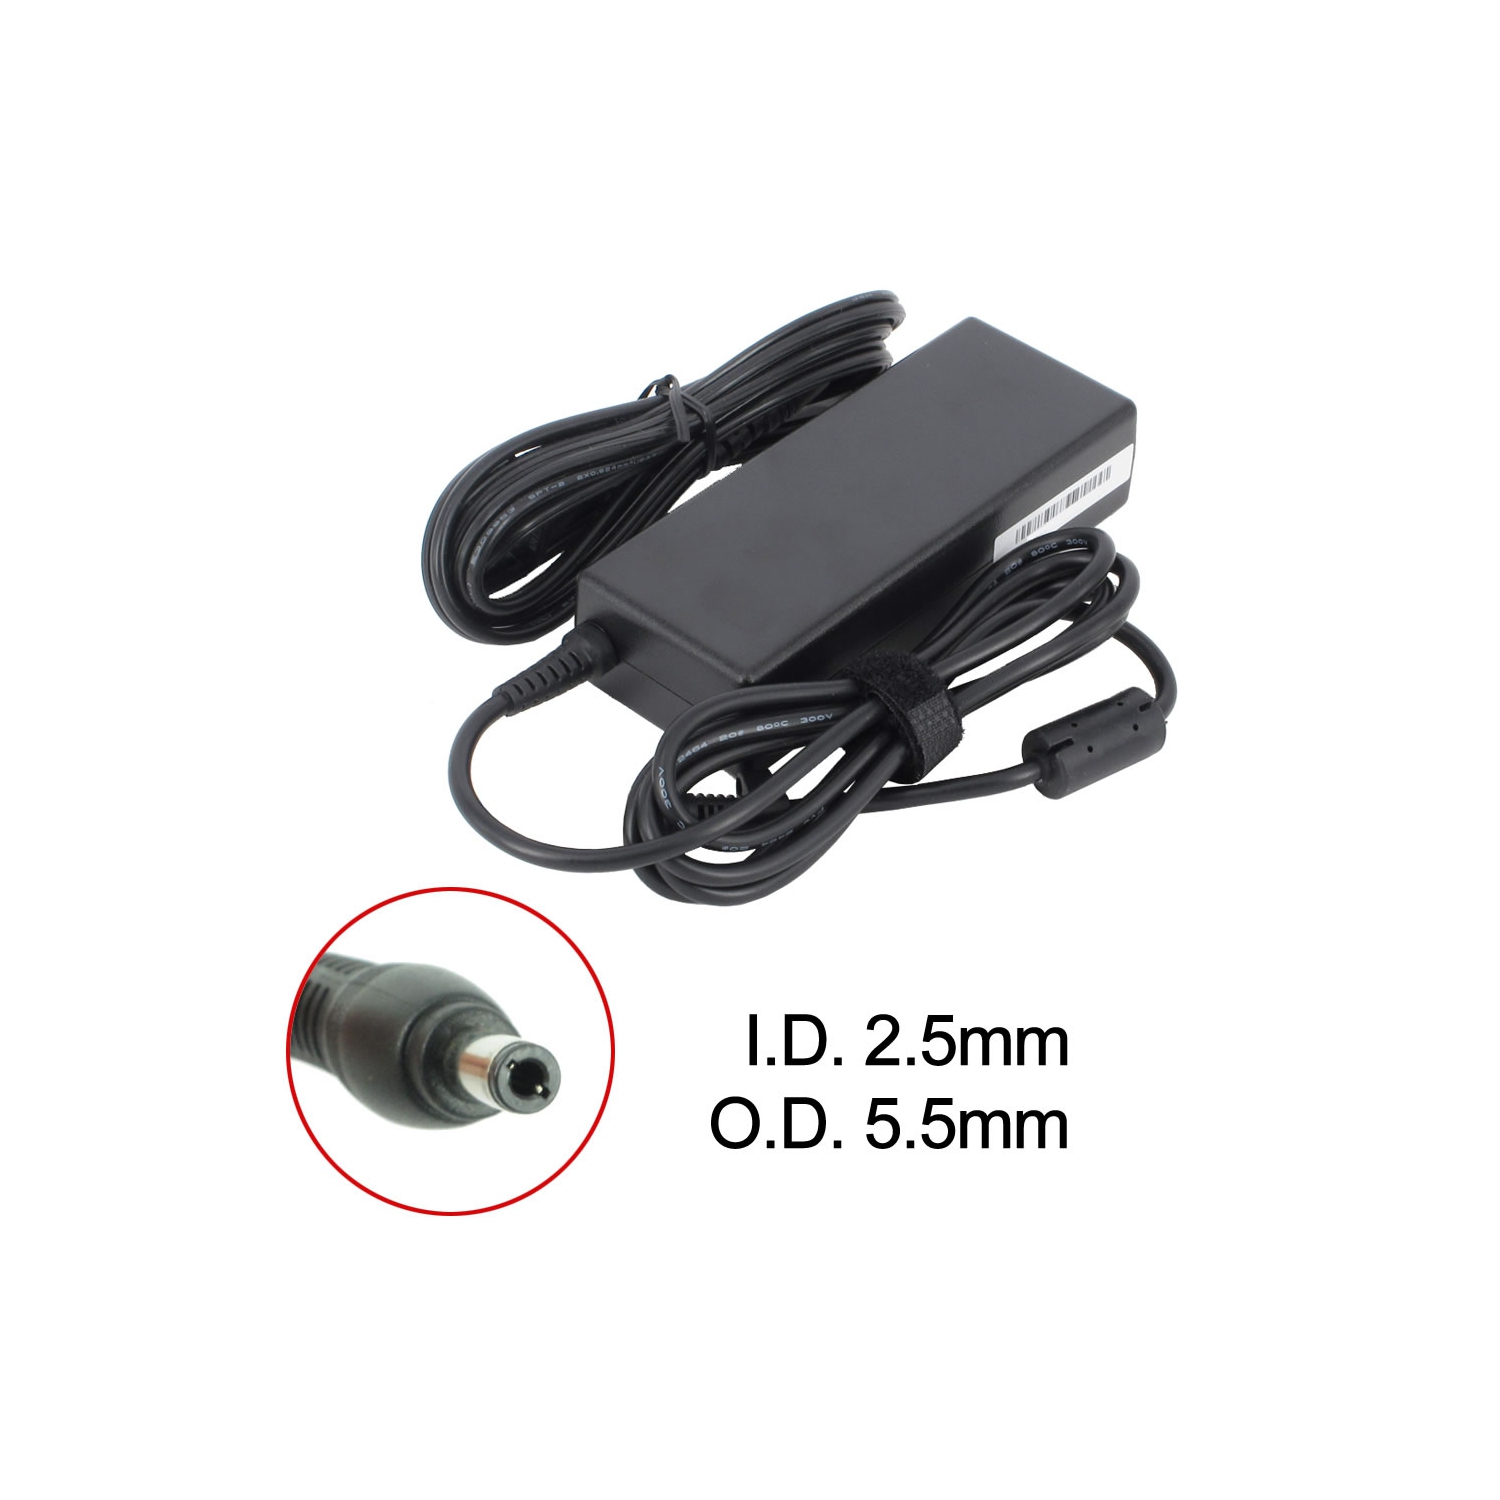 New Laptop AC Adapter for Hasee K480A, 103923, ACE83-110106-2400, 6500714, AC90W1, ADP-90CDDB/BB, SA80T-3115